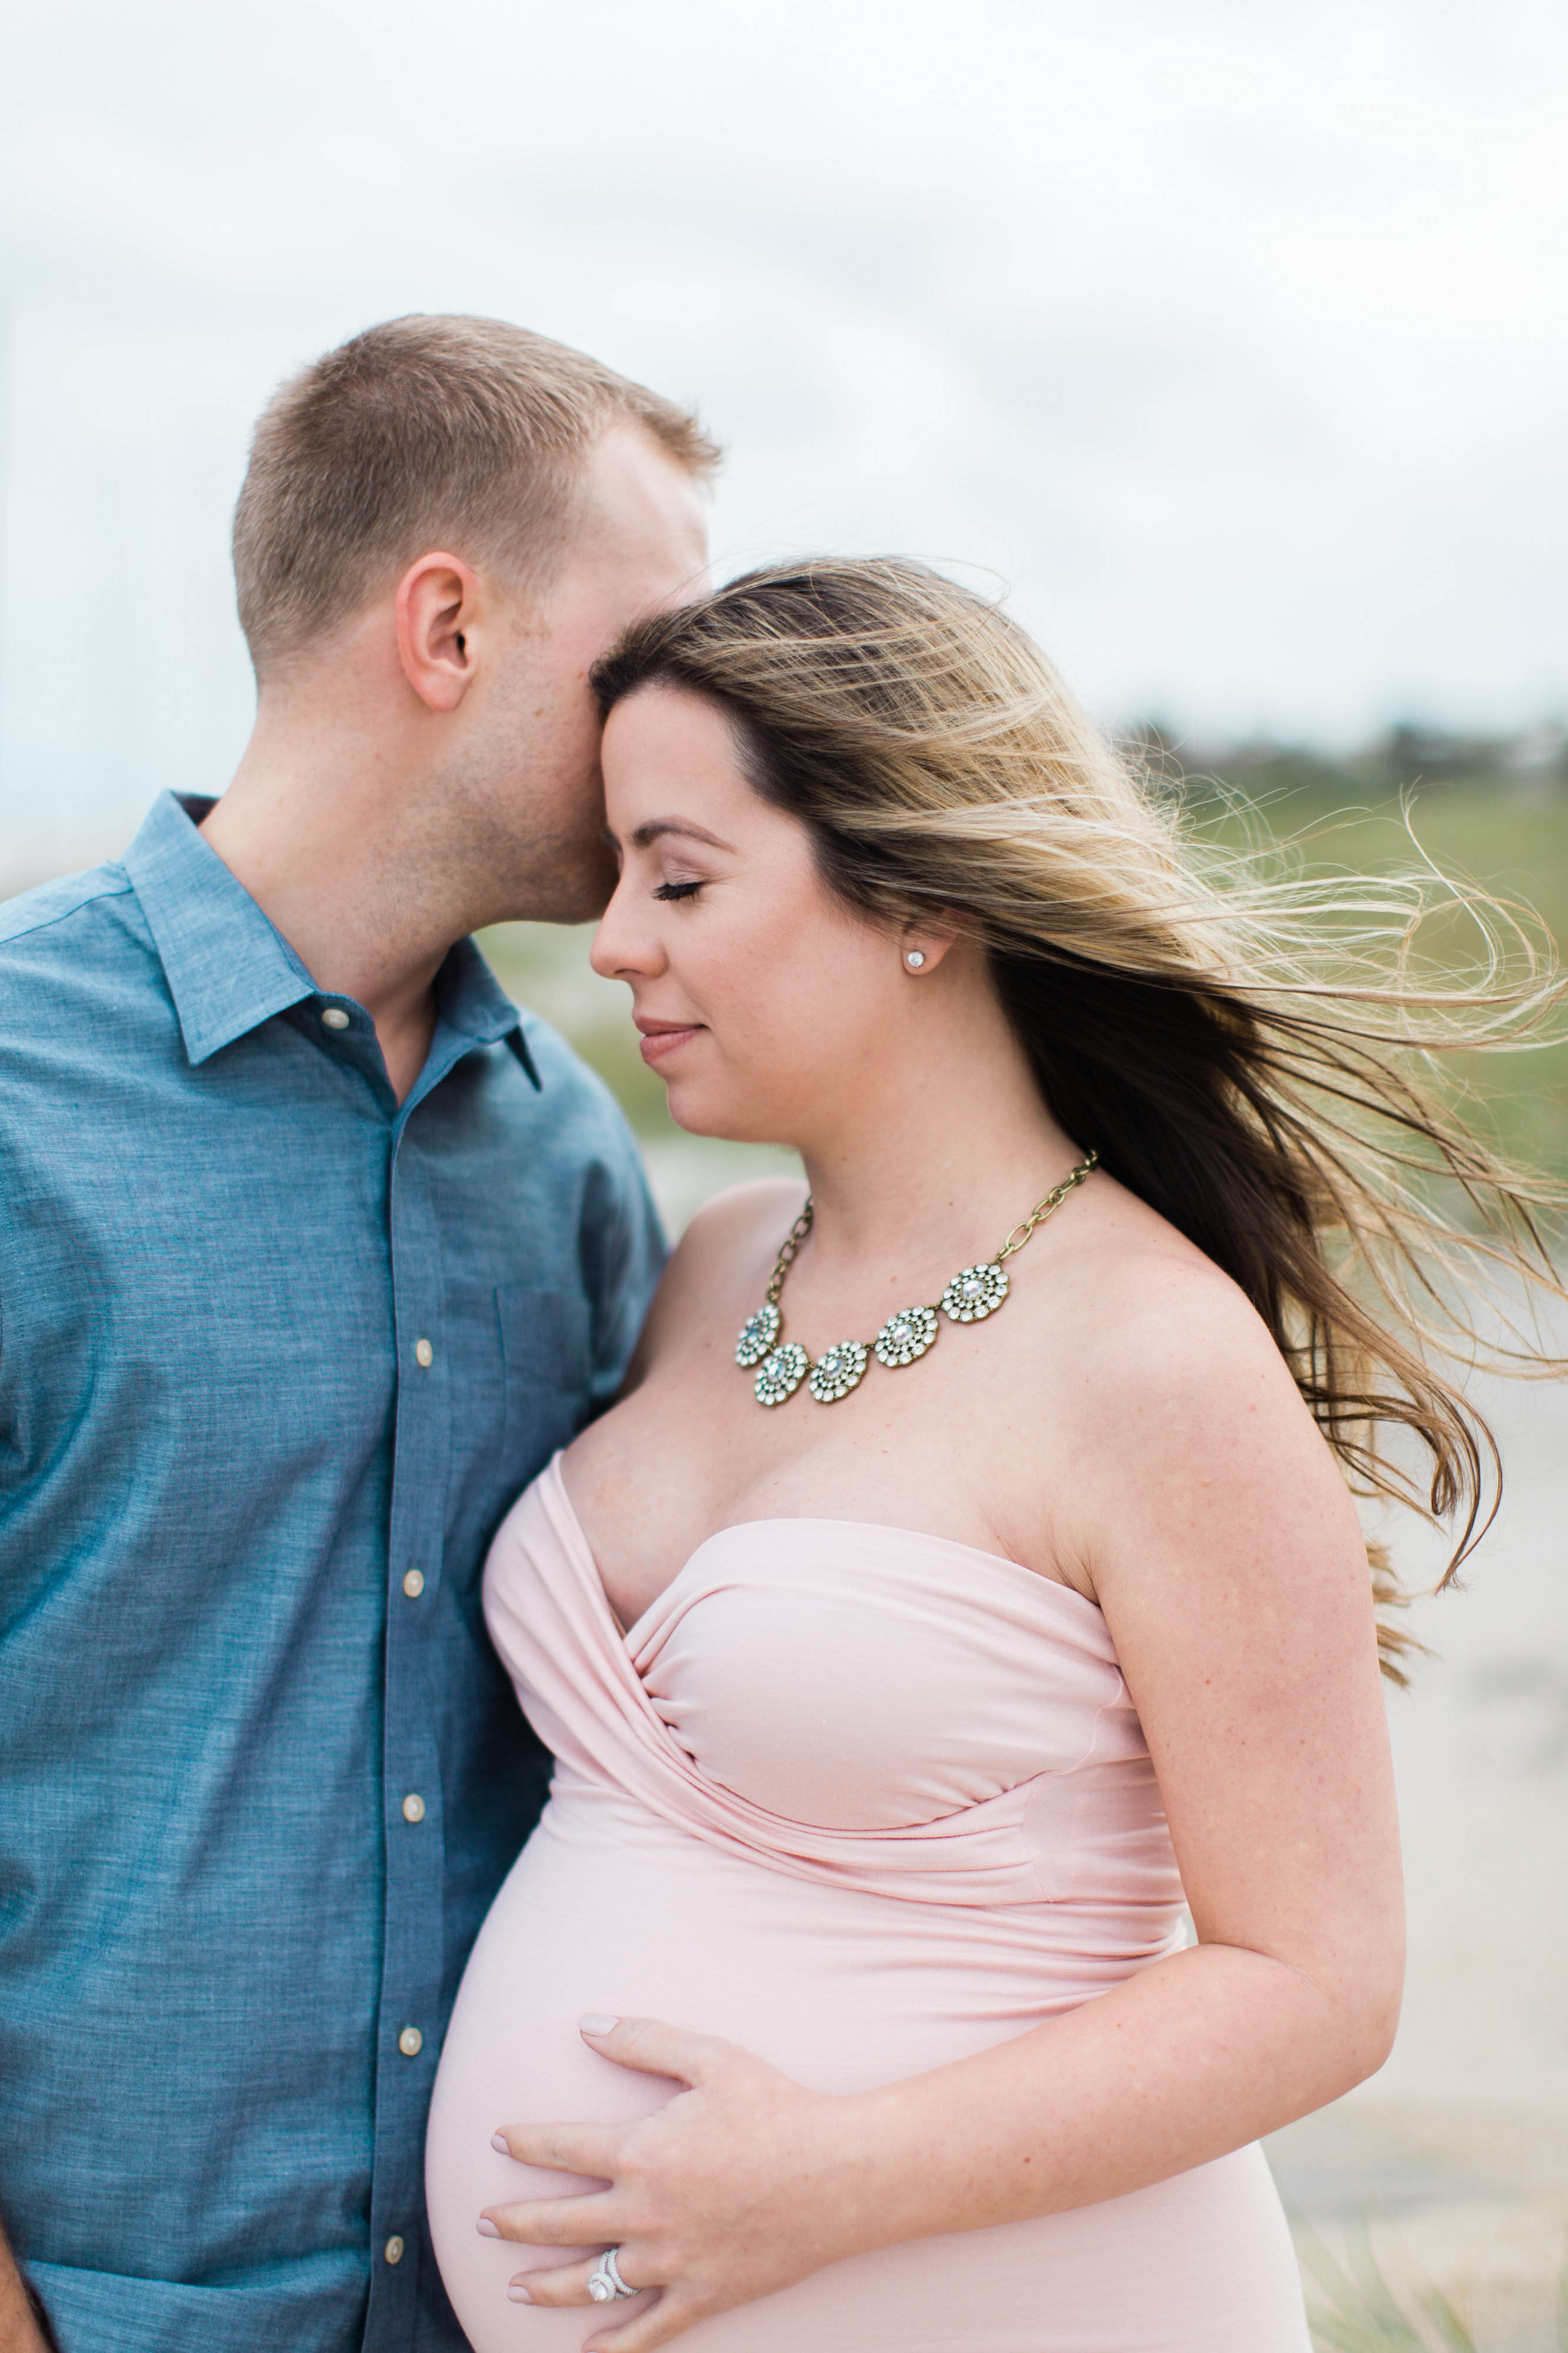 View More: http://thebigday.pass.us/meganmaternity